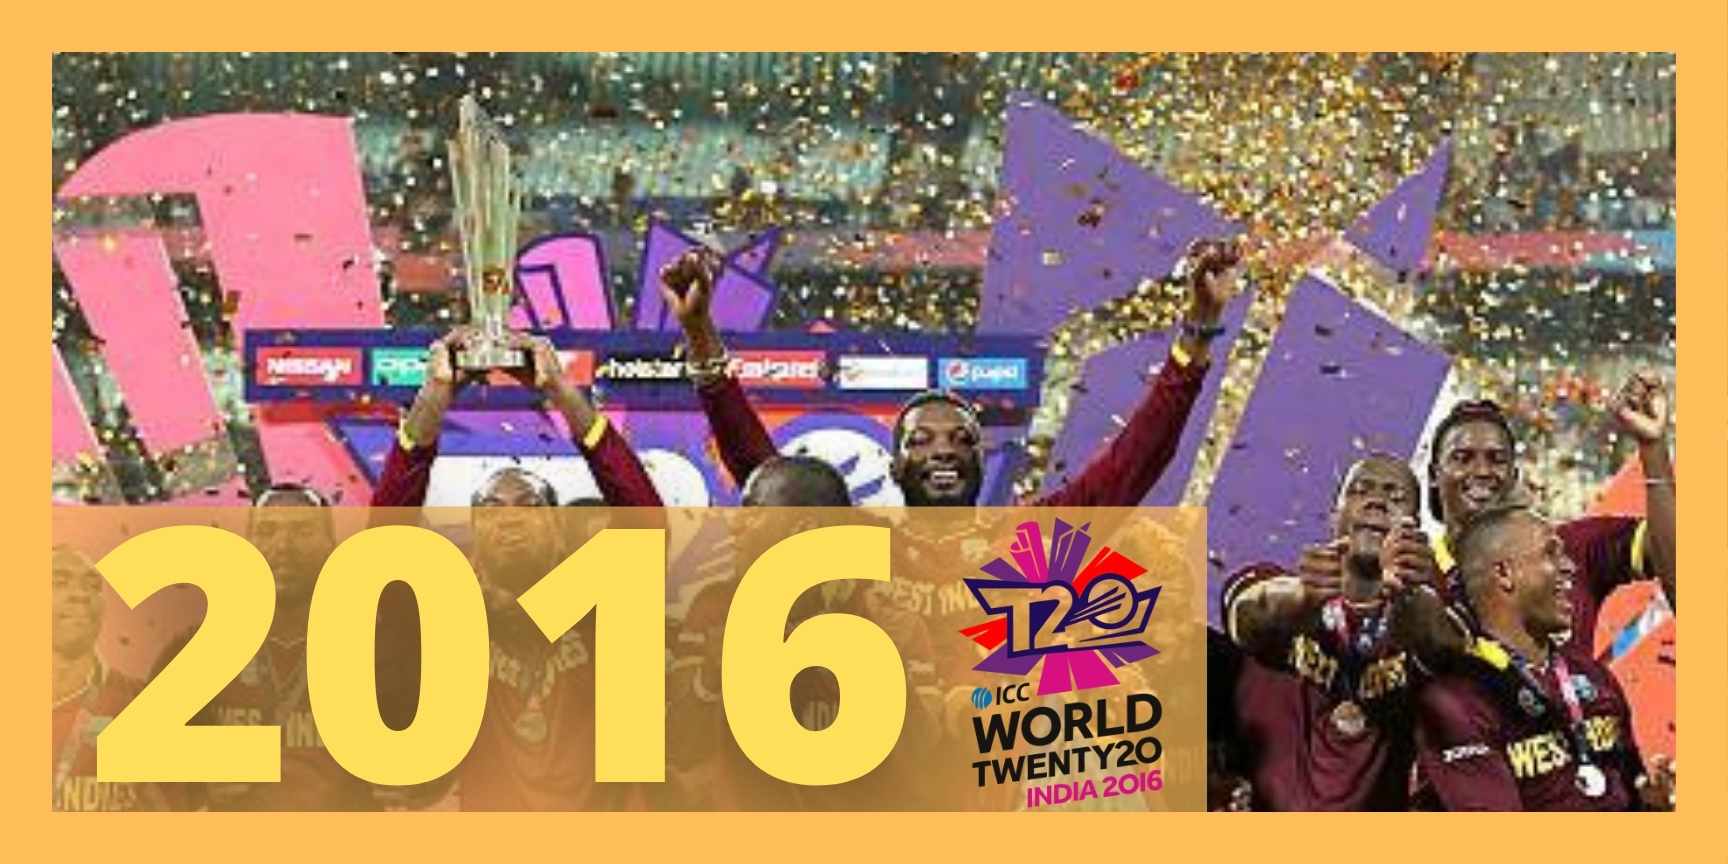 T20 Cricket World Cup 2016 event overview